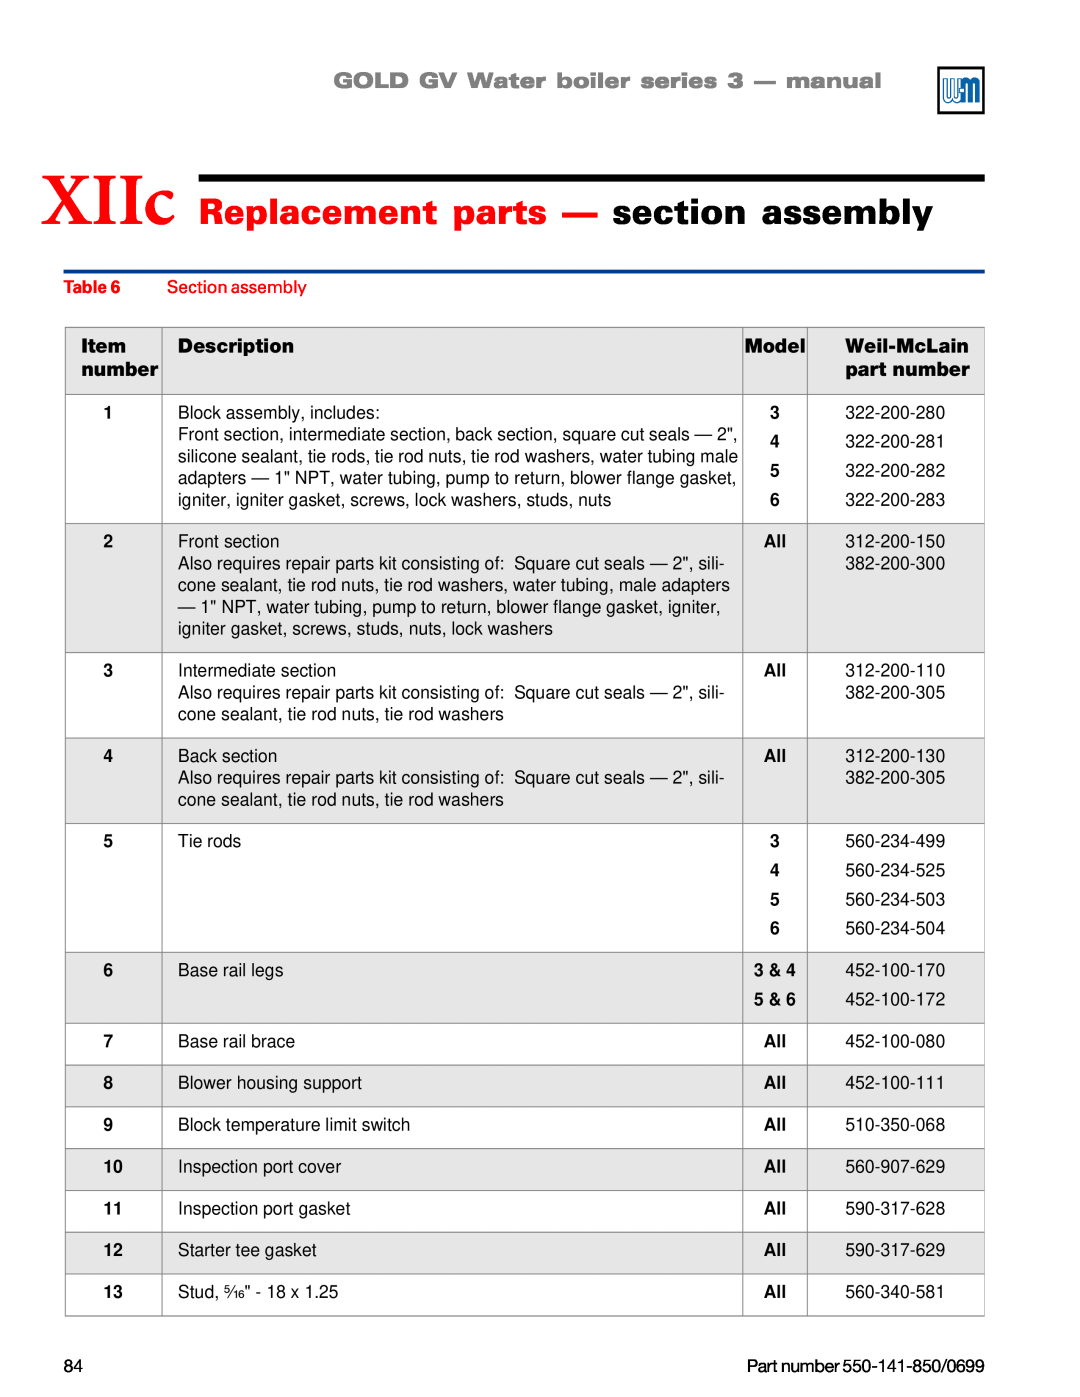 Weil-McLain GOLD DV WATER BOILER XIIc Replacement parts — section assembly, GOLD GV Water boiler series 3 - manual, Item 